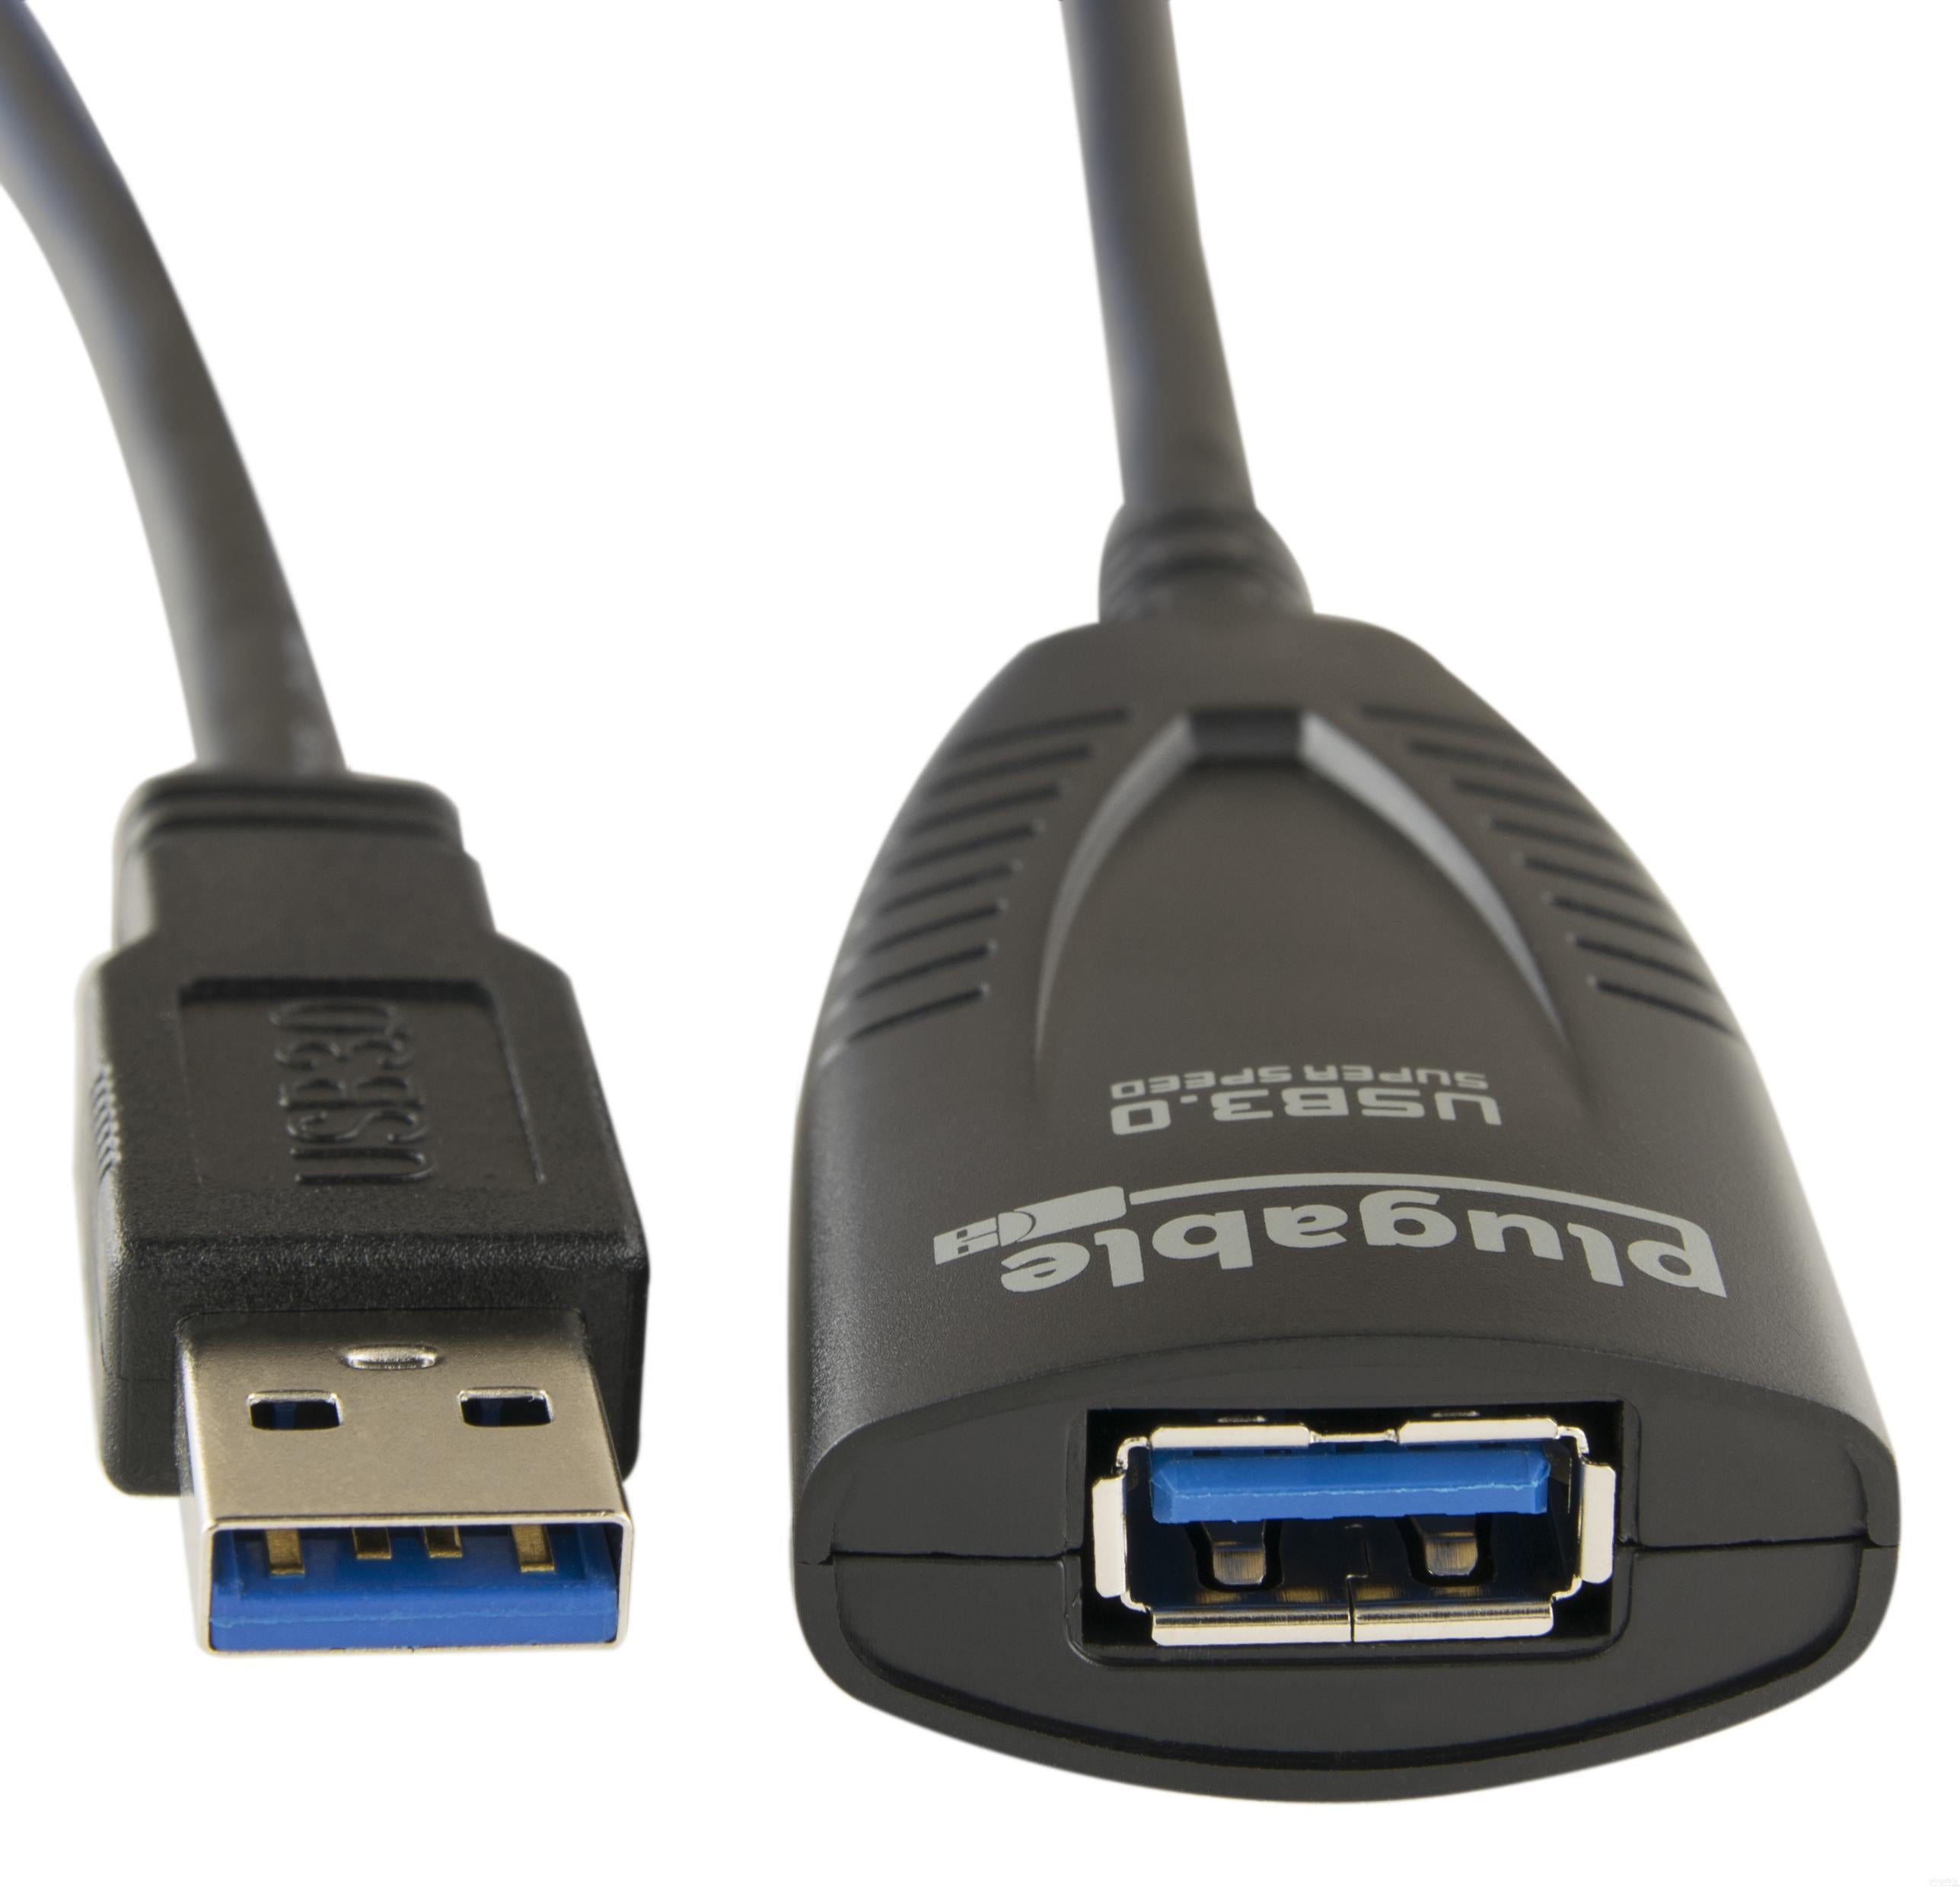 faktor Frø galning Plugable USB 3.0 5M (16ft) Extension Cable with Power Adapter and Back –  Plugable Technologies